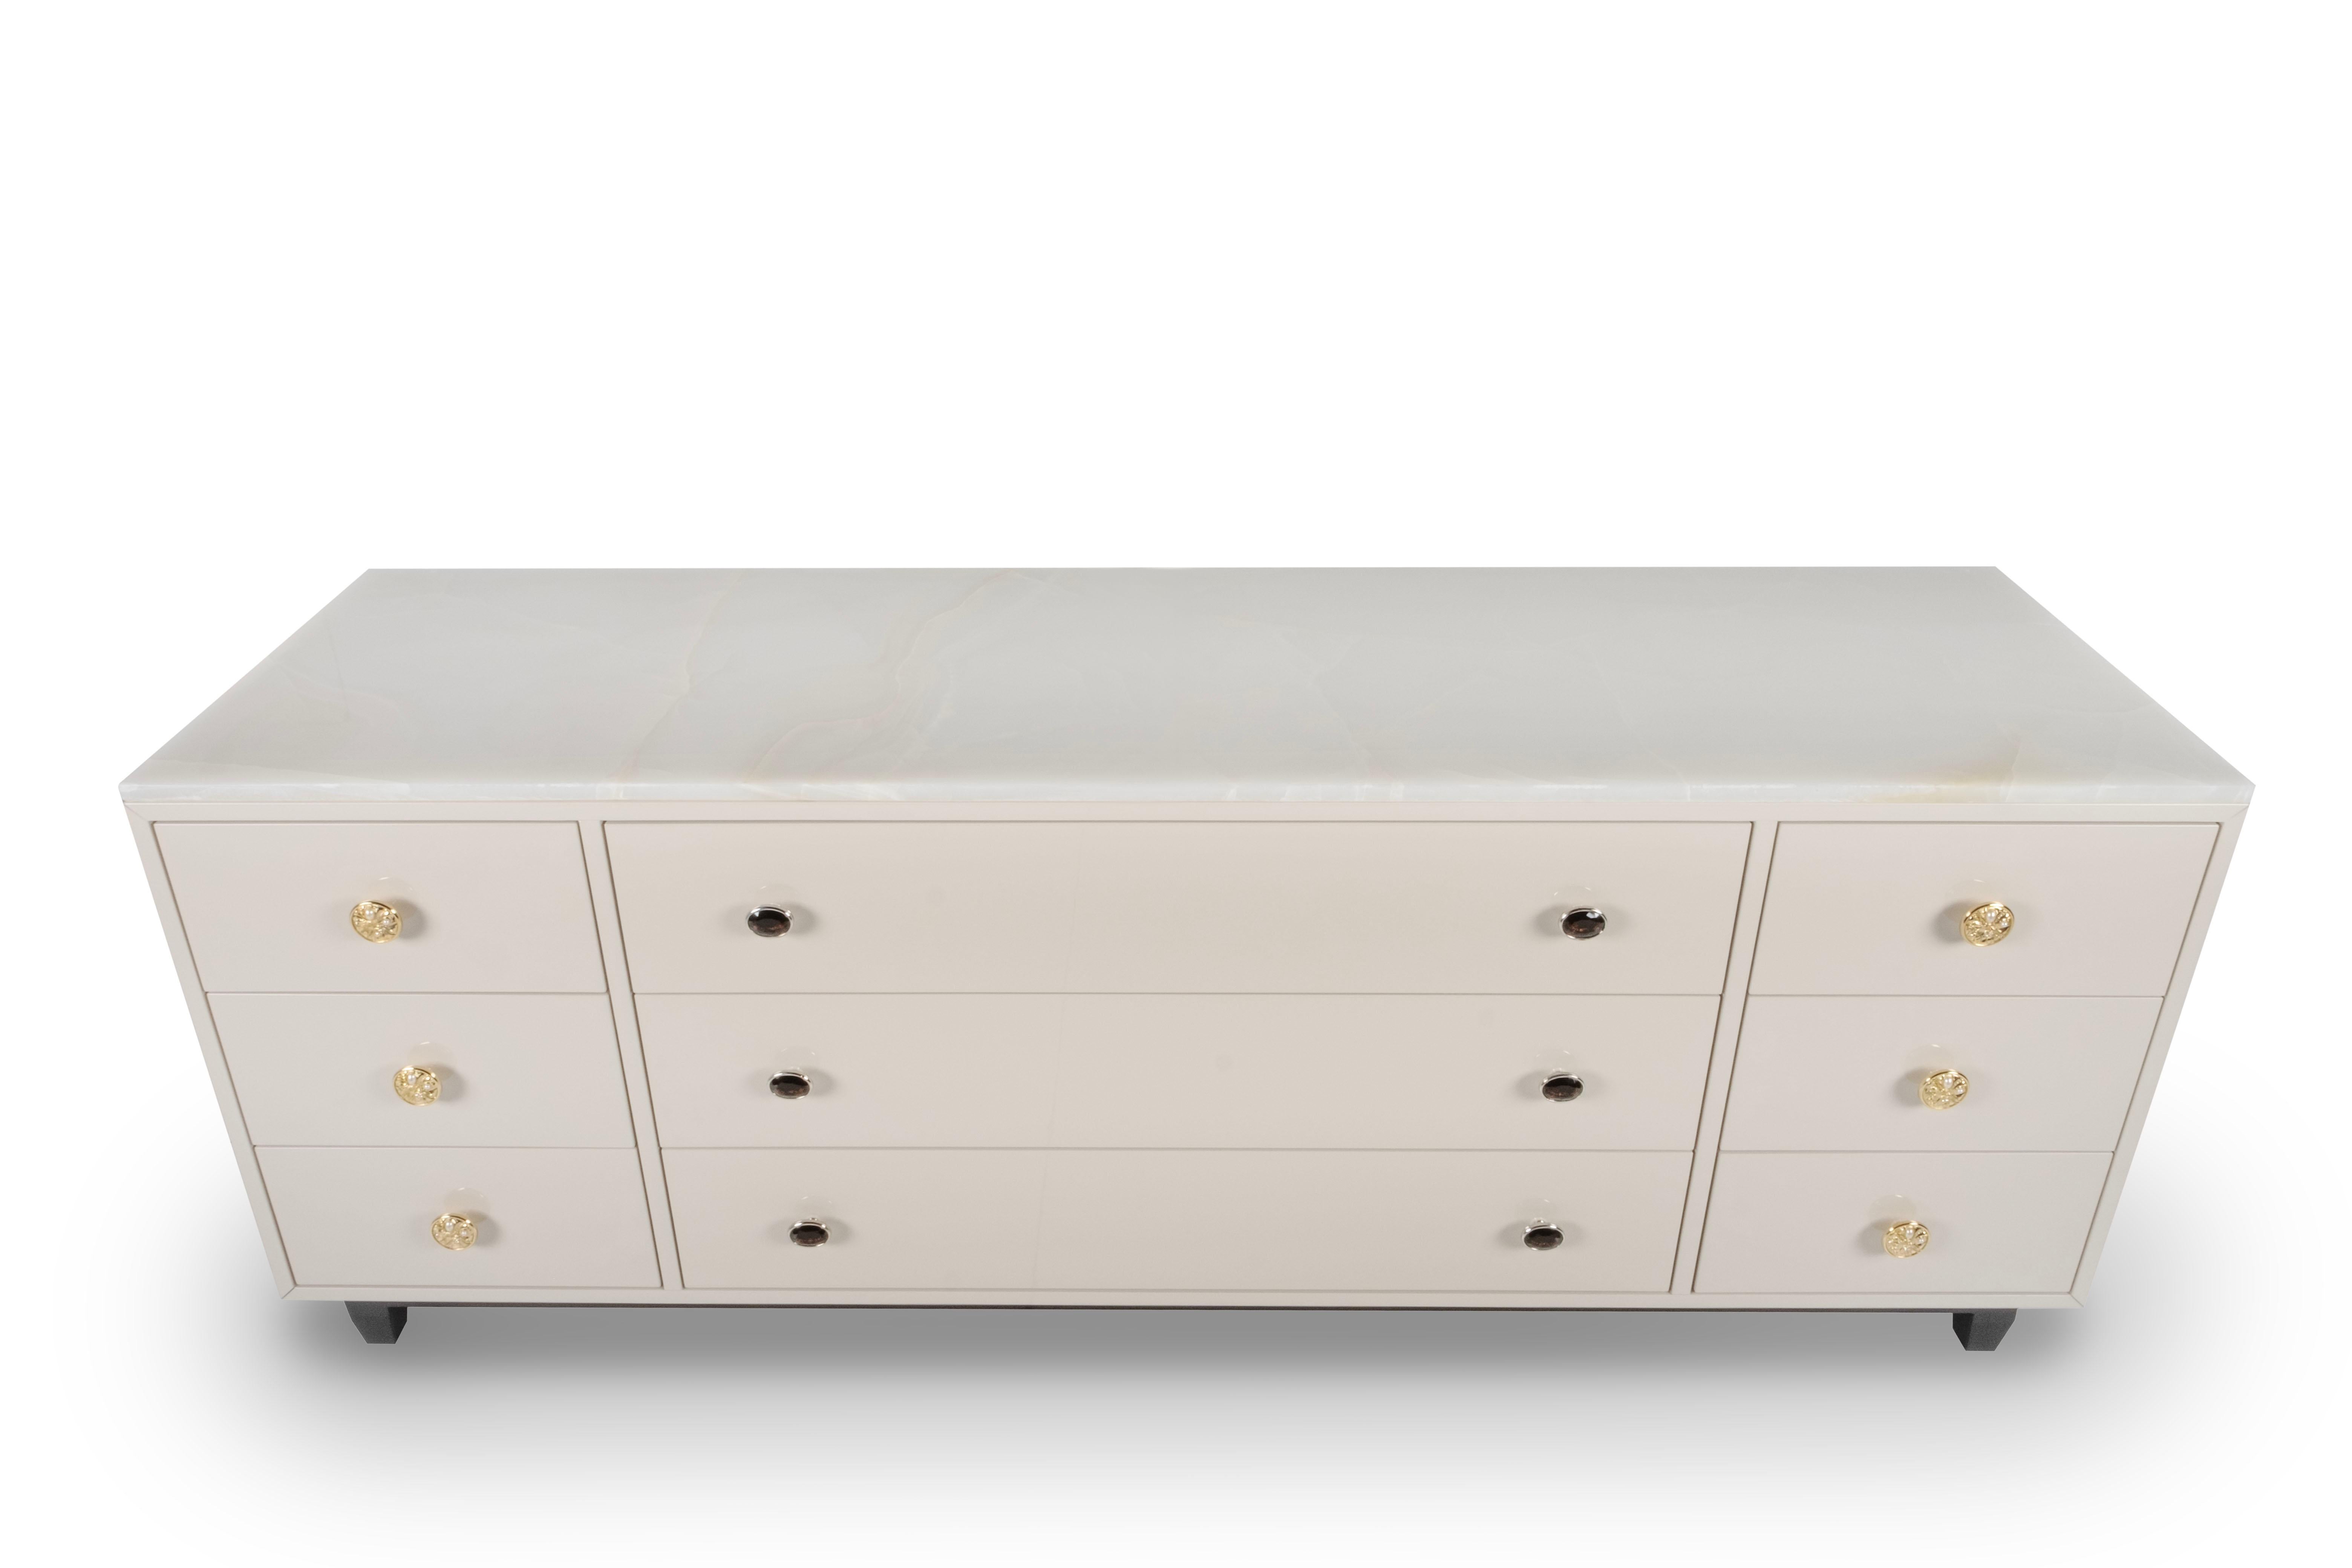 Onor Chest of Drawers, Contemporary Collection, handcrafted in Portugal - Europe by Greenapple.

*TEXTO*

Onor Chest of Drawers material codes
FI021 Beige lacquer; high-gloss finish
WD005 Beech; dark brown stained; satin finish
ST059 White Onyx;